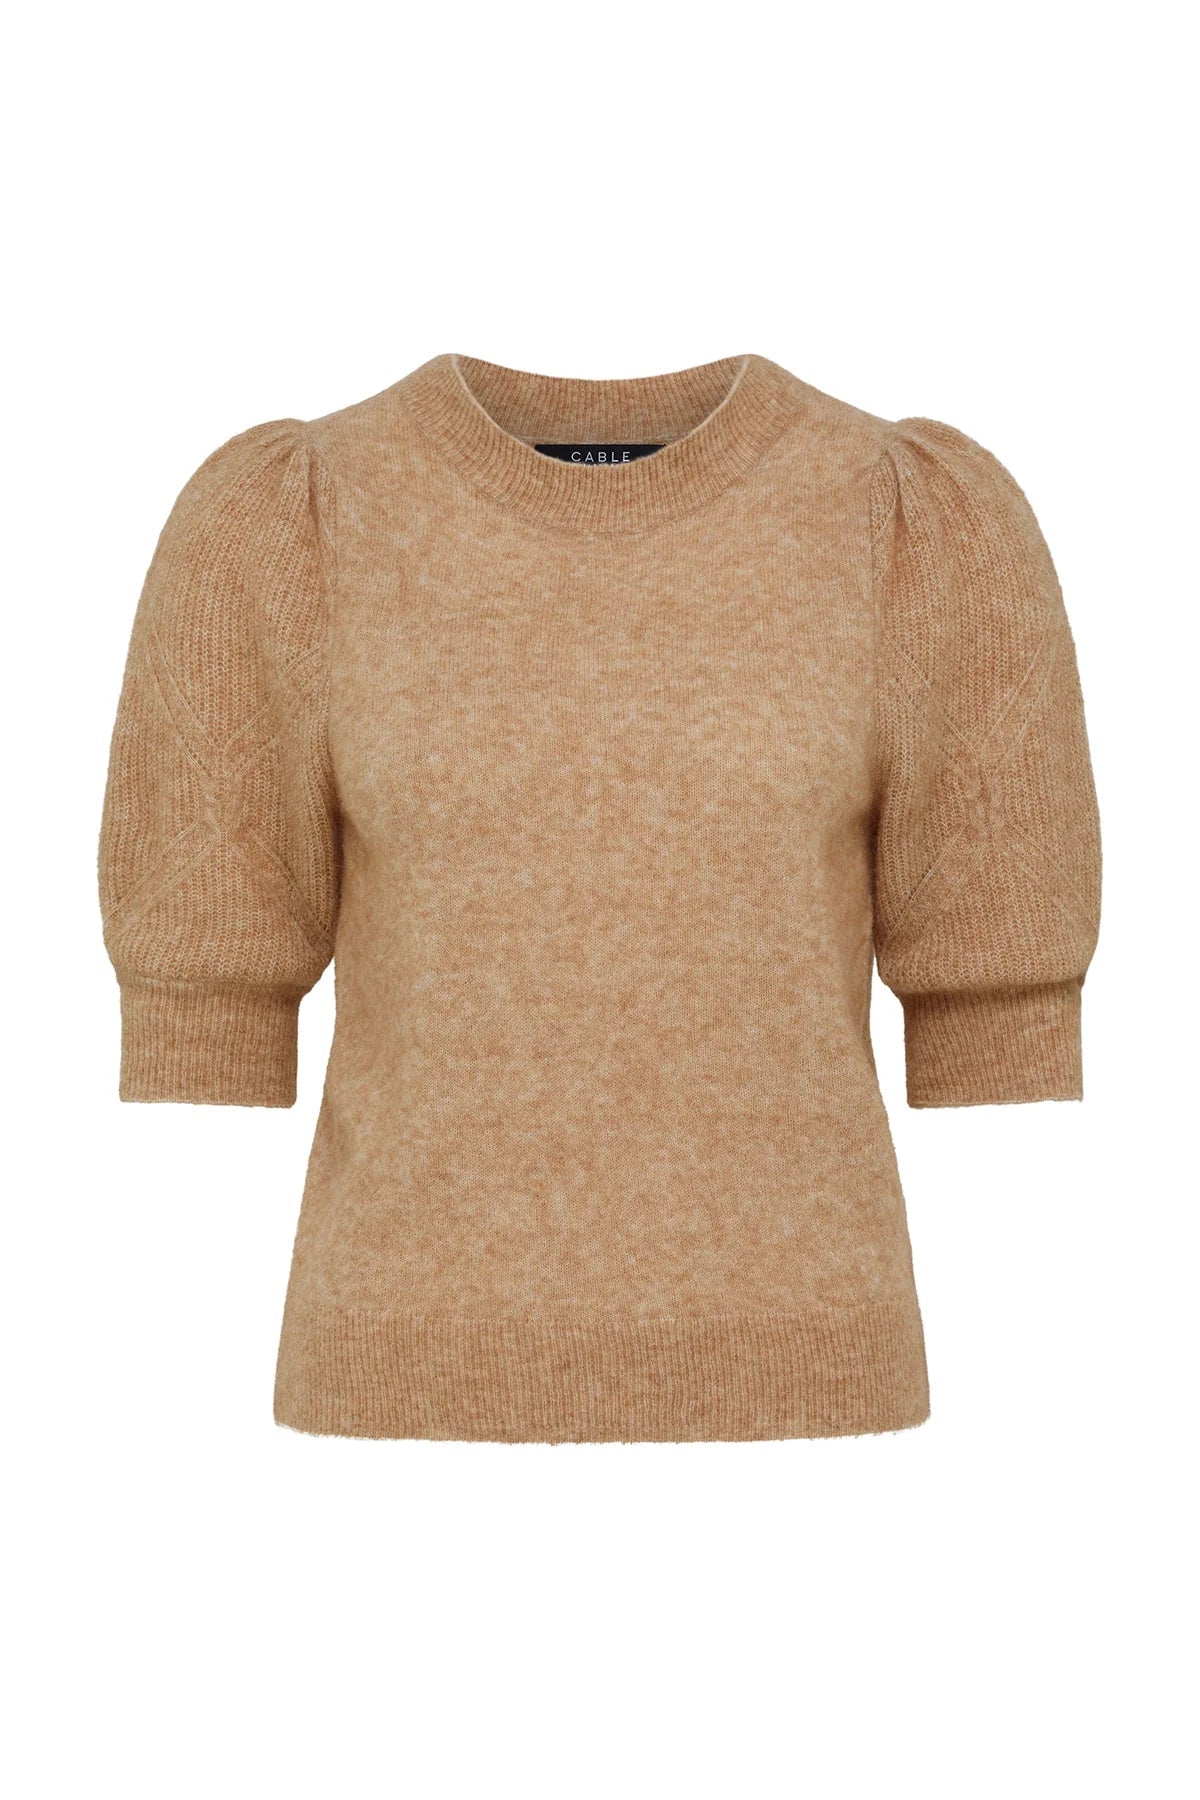 Shop Mohair Puff Sleeve Tee | Camel - Cable Melbourne